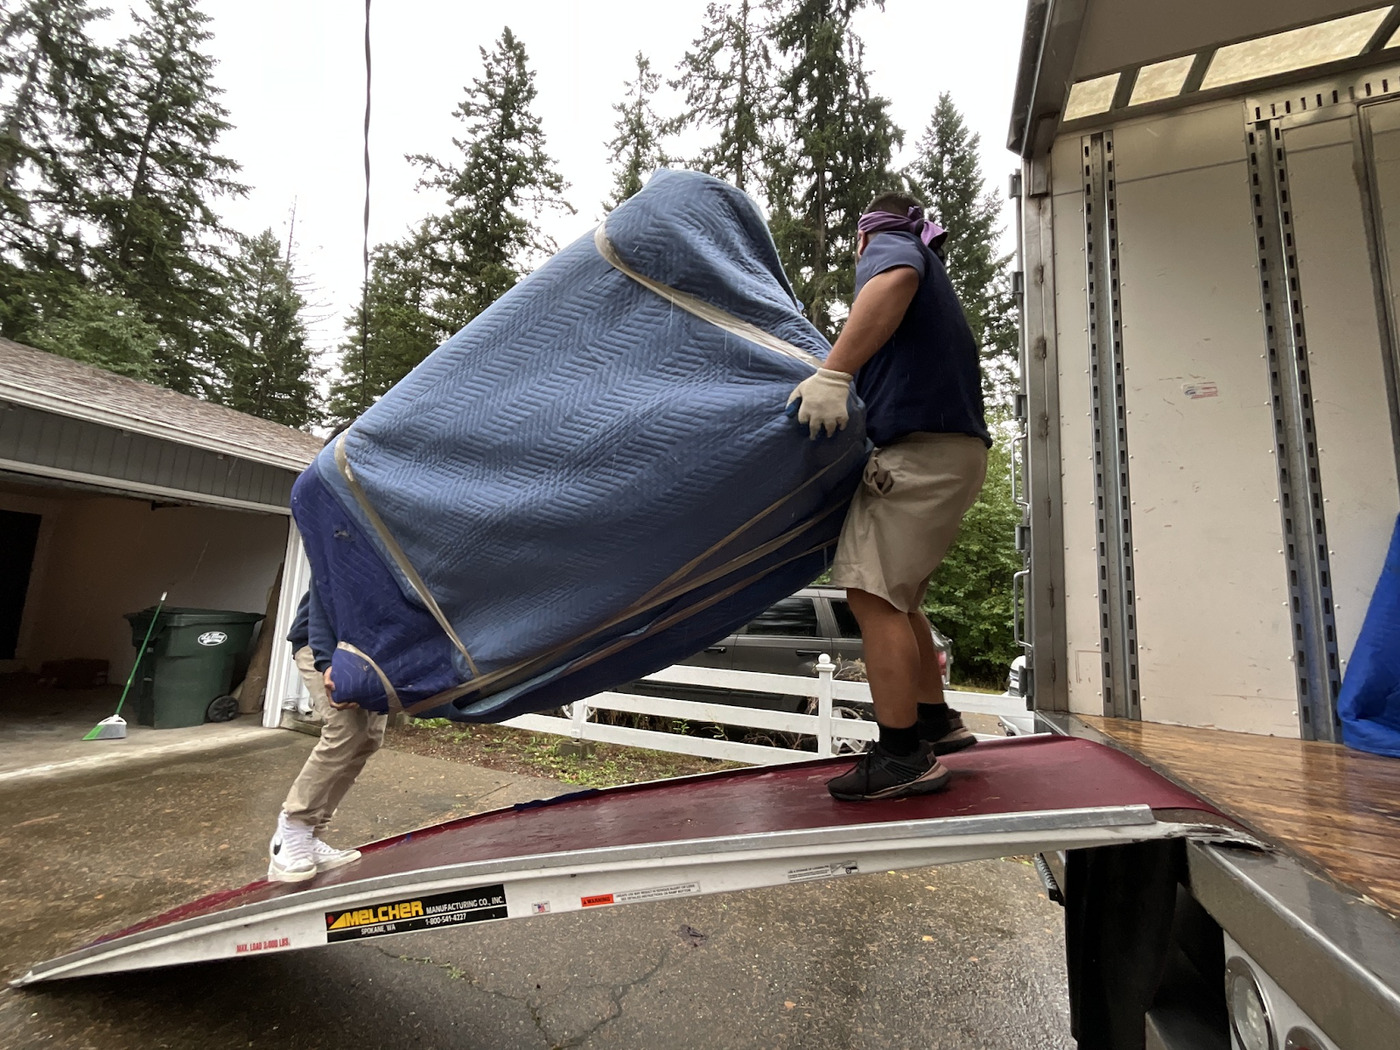 APEX Moving & Storage, a full-service moving company based in Tacoma, Washington, has specialized in residential and commercial relocations since 1997, earning a reputation for excellence, professionalism, and customer satisfaction.